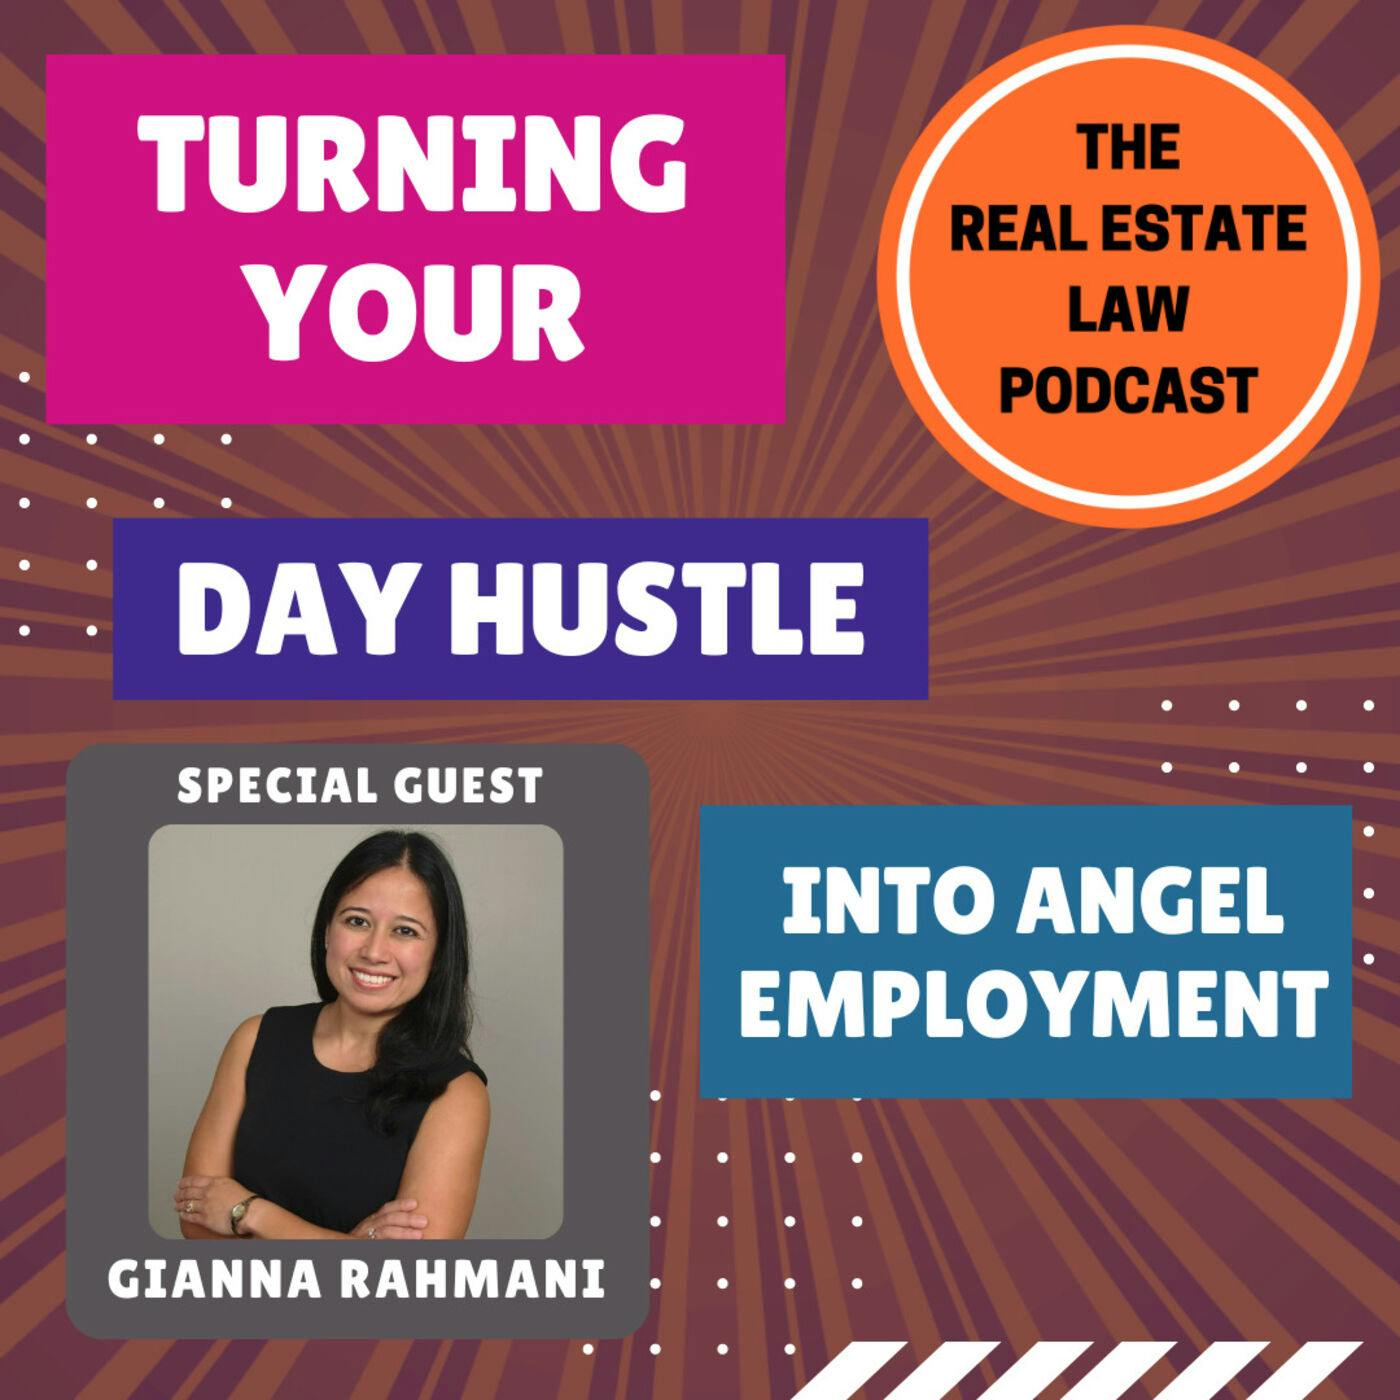 Turning Your Day Hustle into Angel Employment - Entrepreneurial Success with Gianna Rahmani